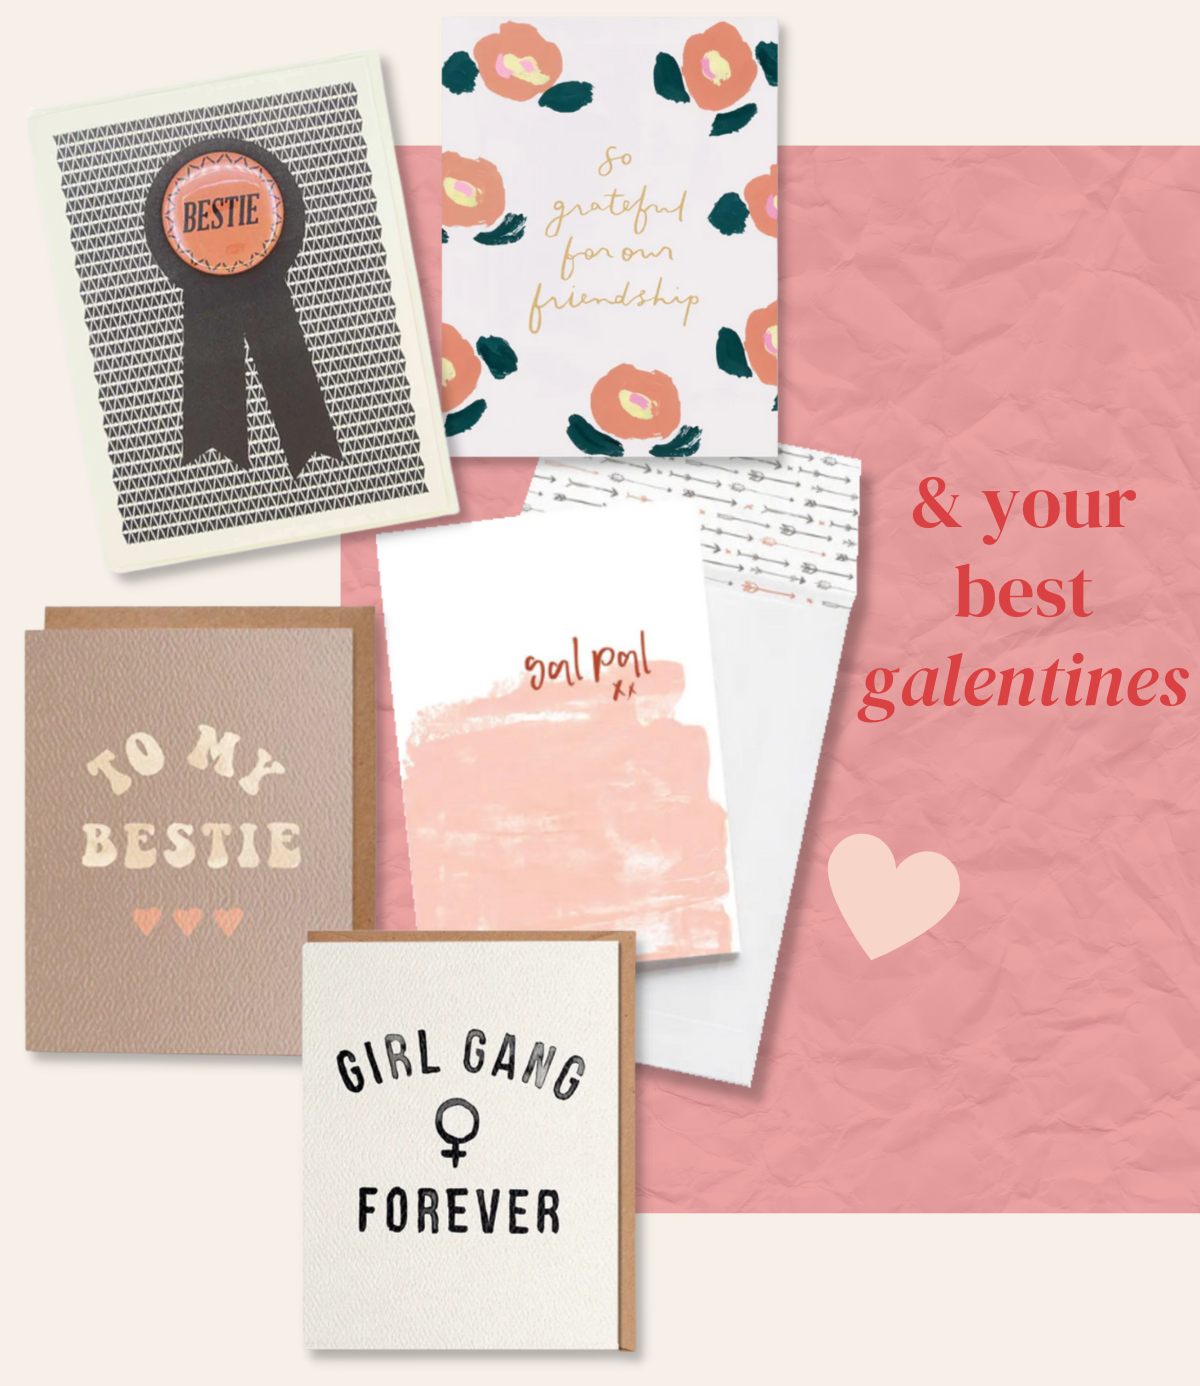 urbanic paper boutique los angeles california gifts stationery valentine galentine gal pal best friends girl gang bestie